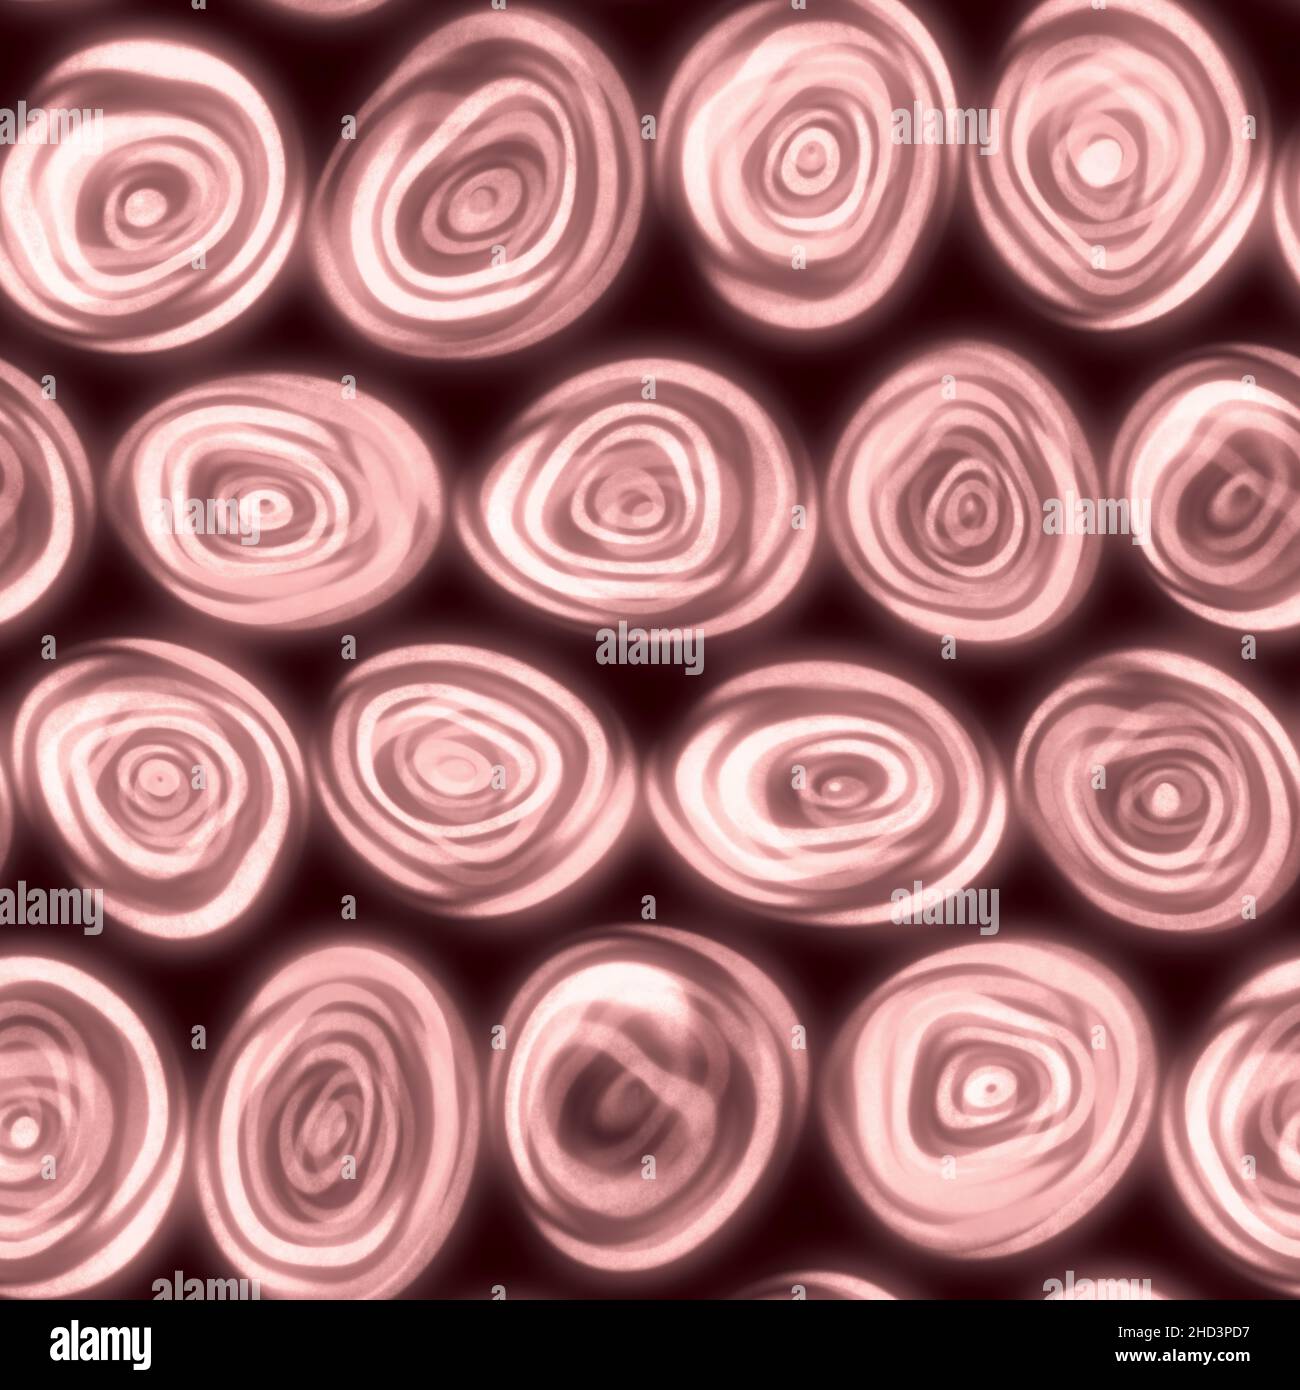 Large squiggly wiggly swirly whirly spiral circles that look hand drawn in a rose pink seamless tile. Stock Photo